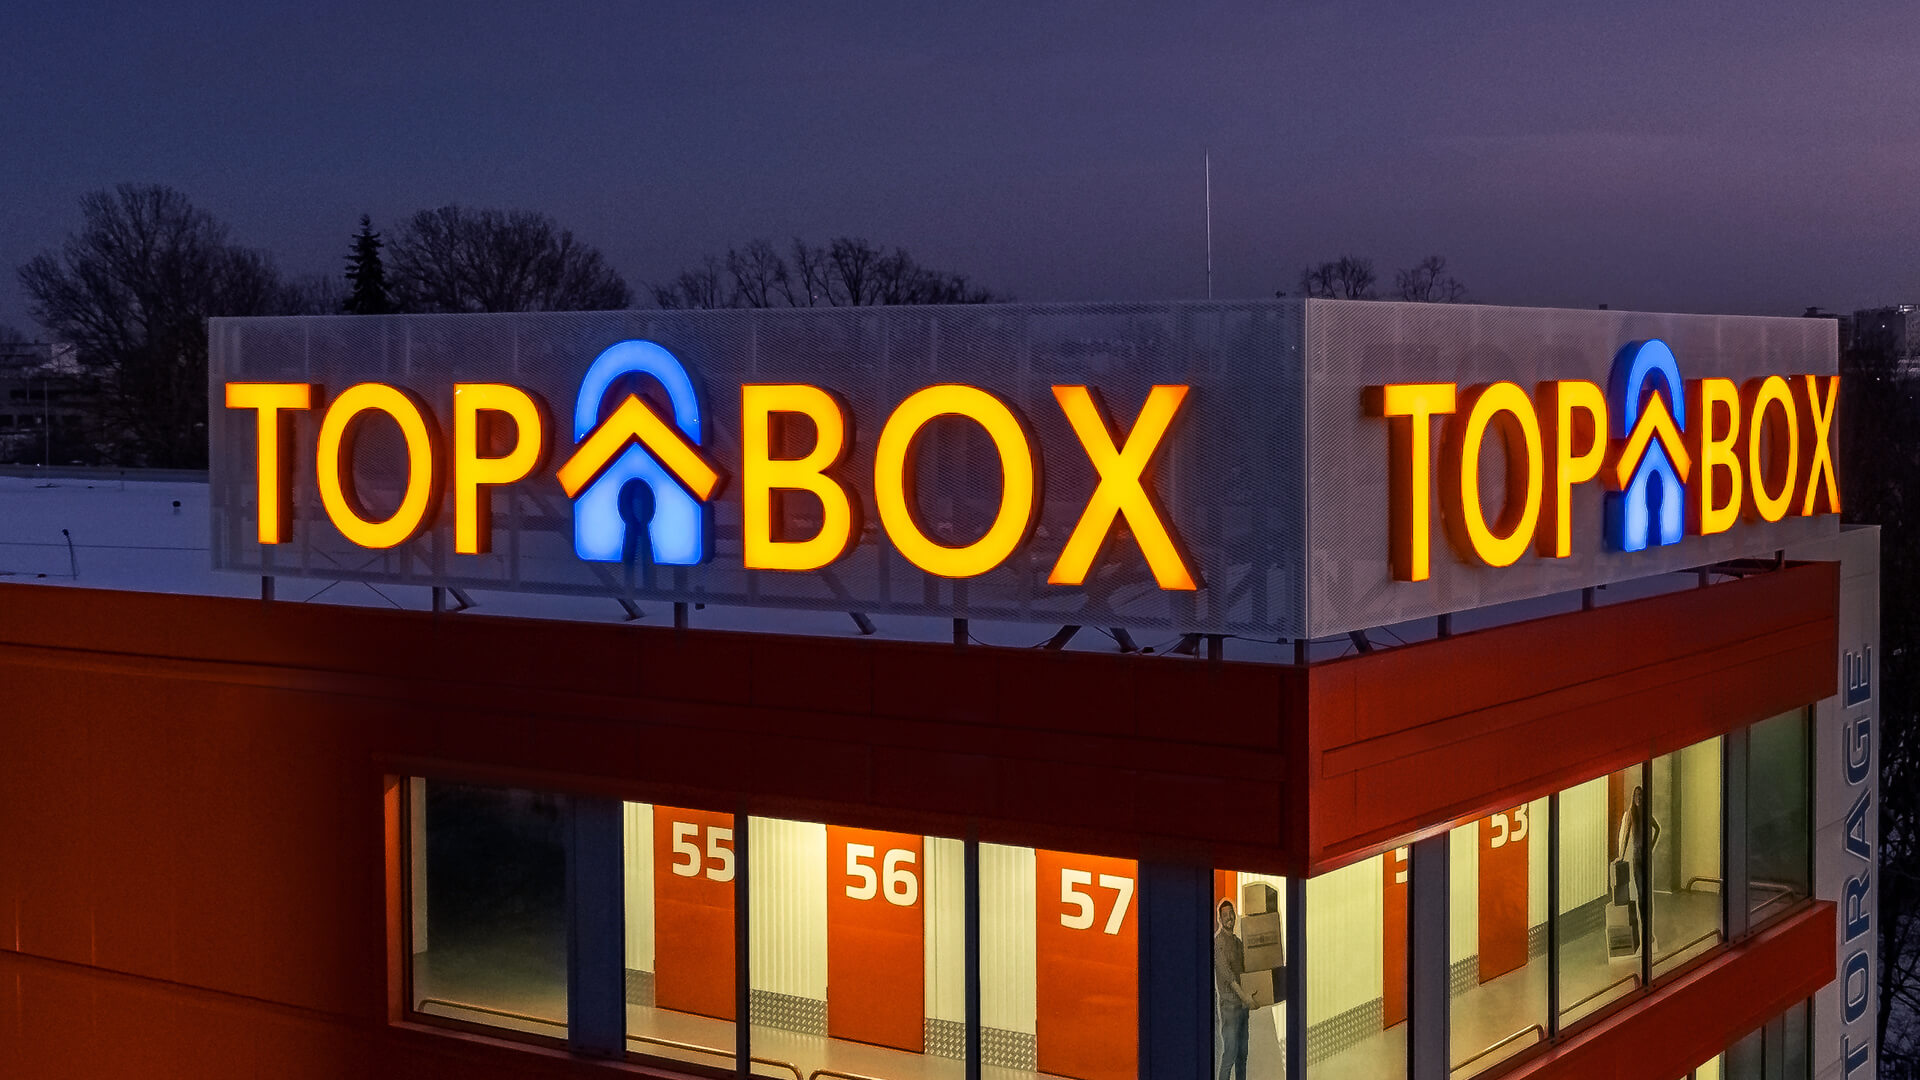 TOP BOX - Letters along with the logo, illuminating the front, above the entrance